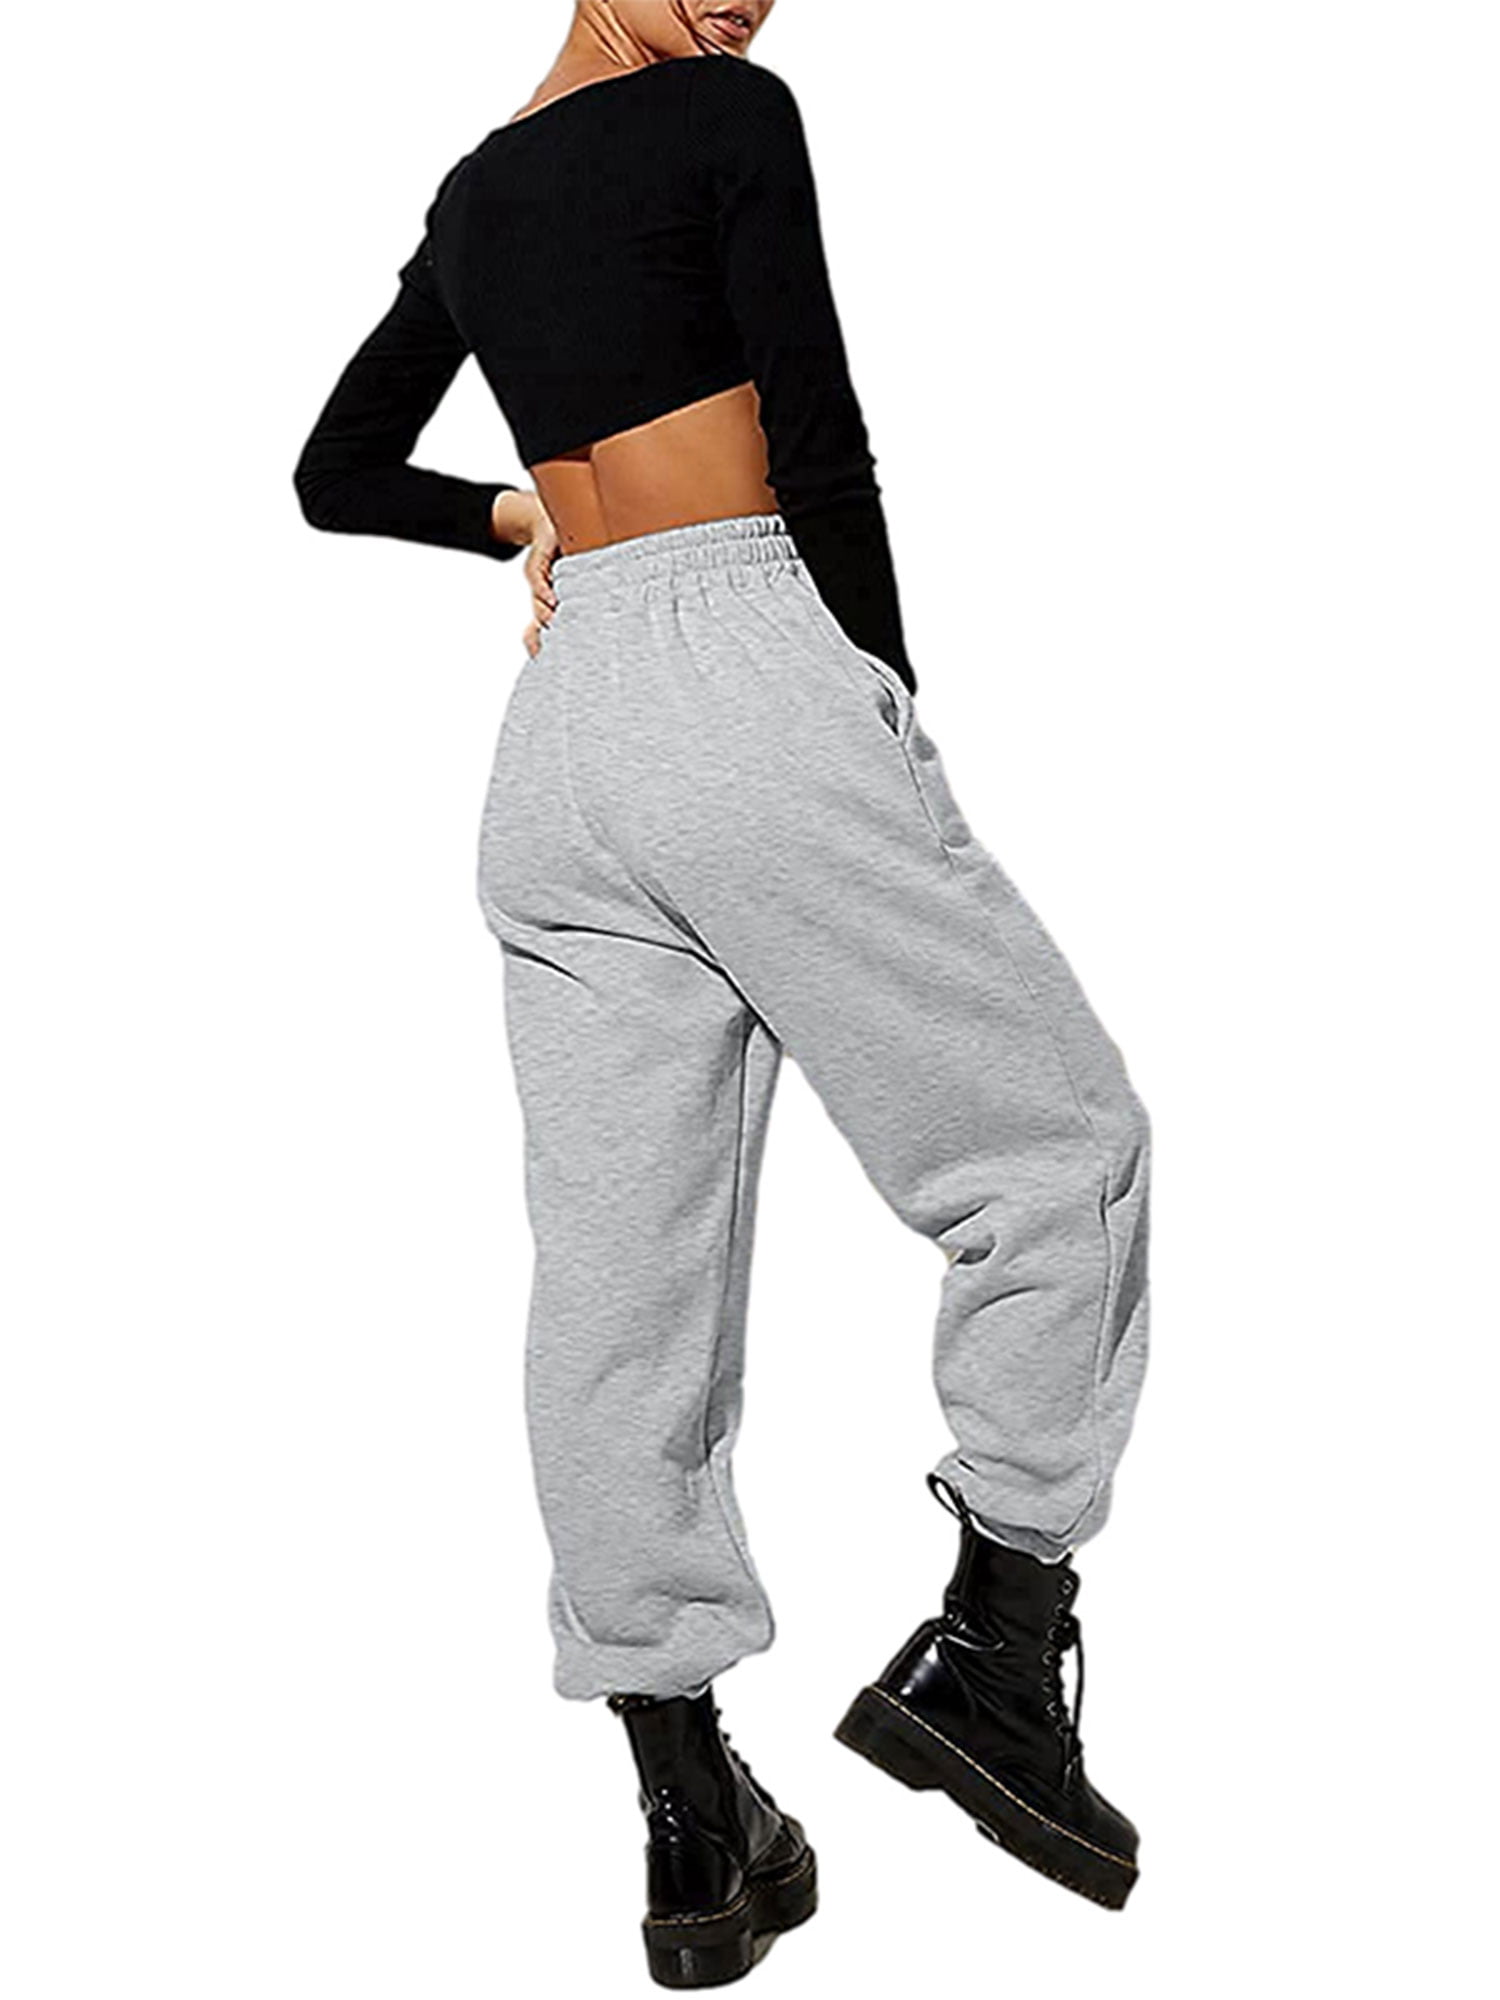 Grianlook Womens High Waisted Sweatpants Drawstring Jogger Sweat Pants  Cinch Bottom Workout Gym Trousers with Pocket Grey L